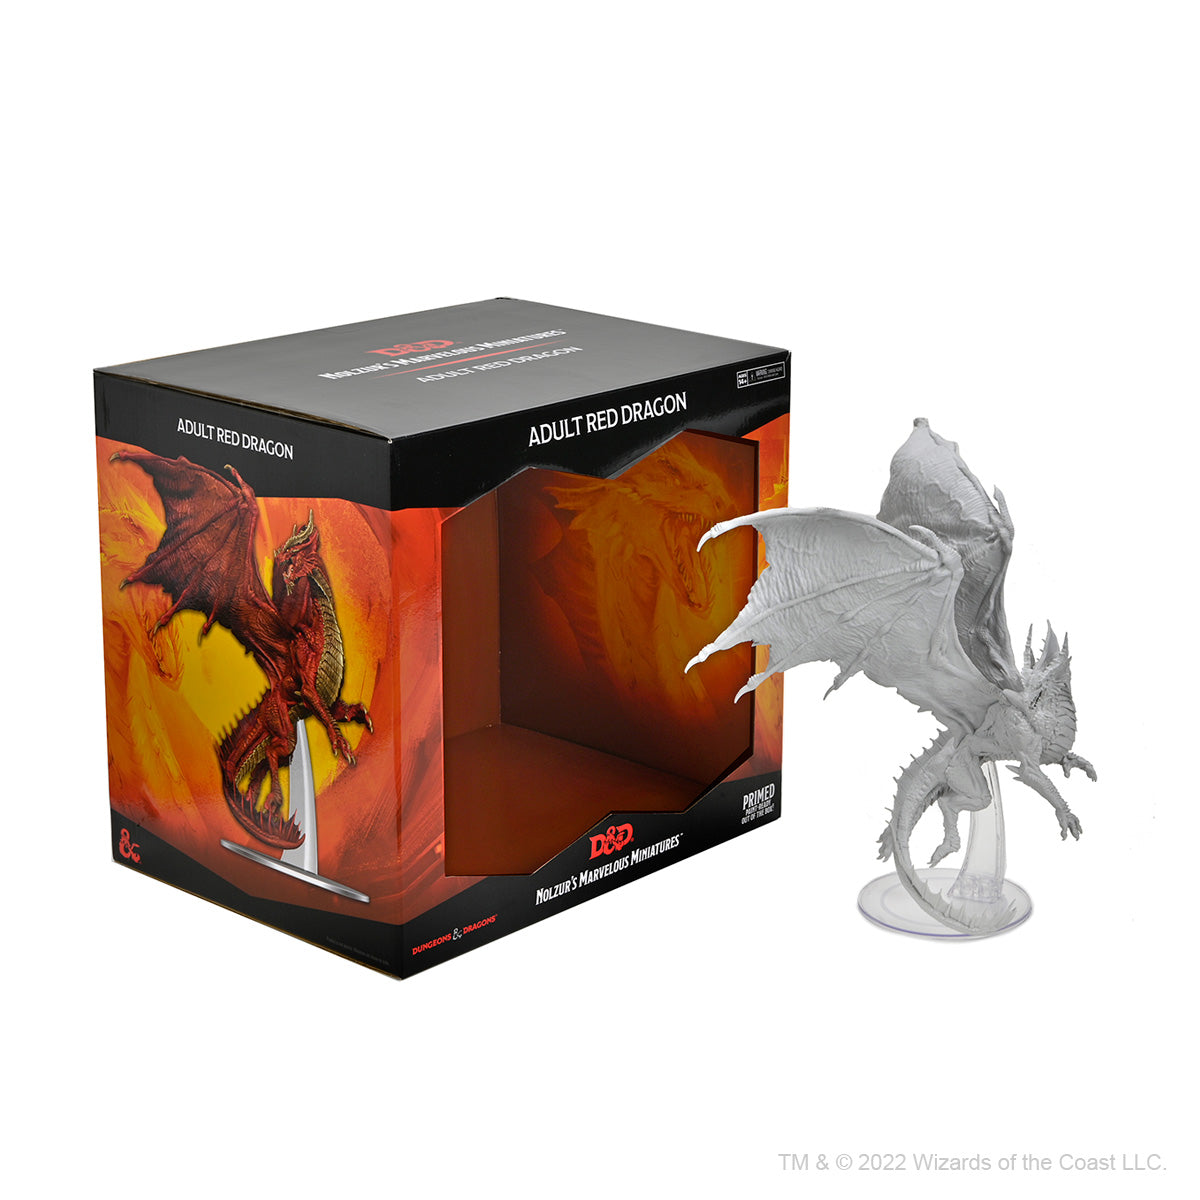 Adult Red Dragon compare to box